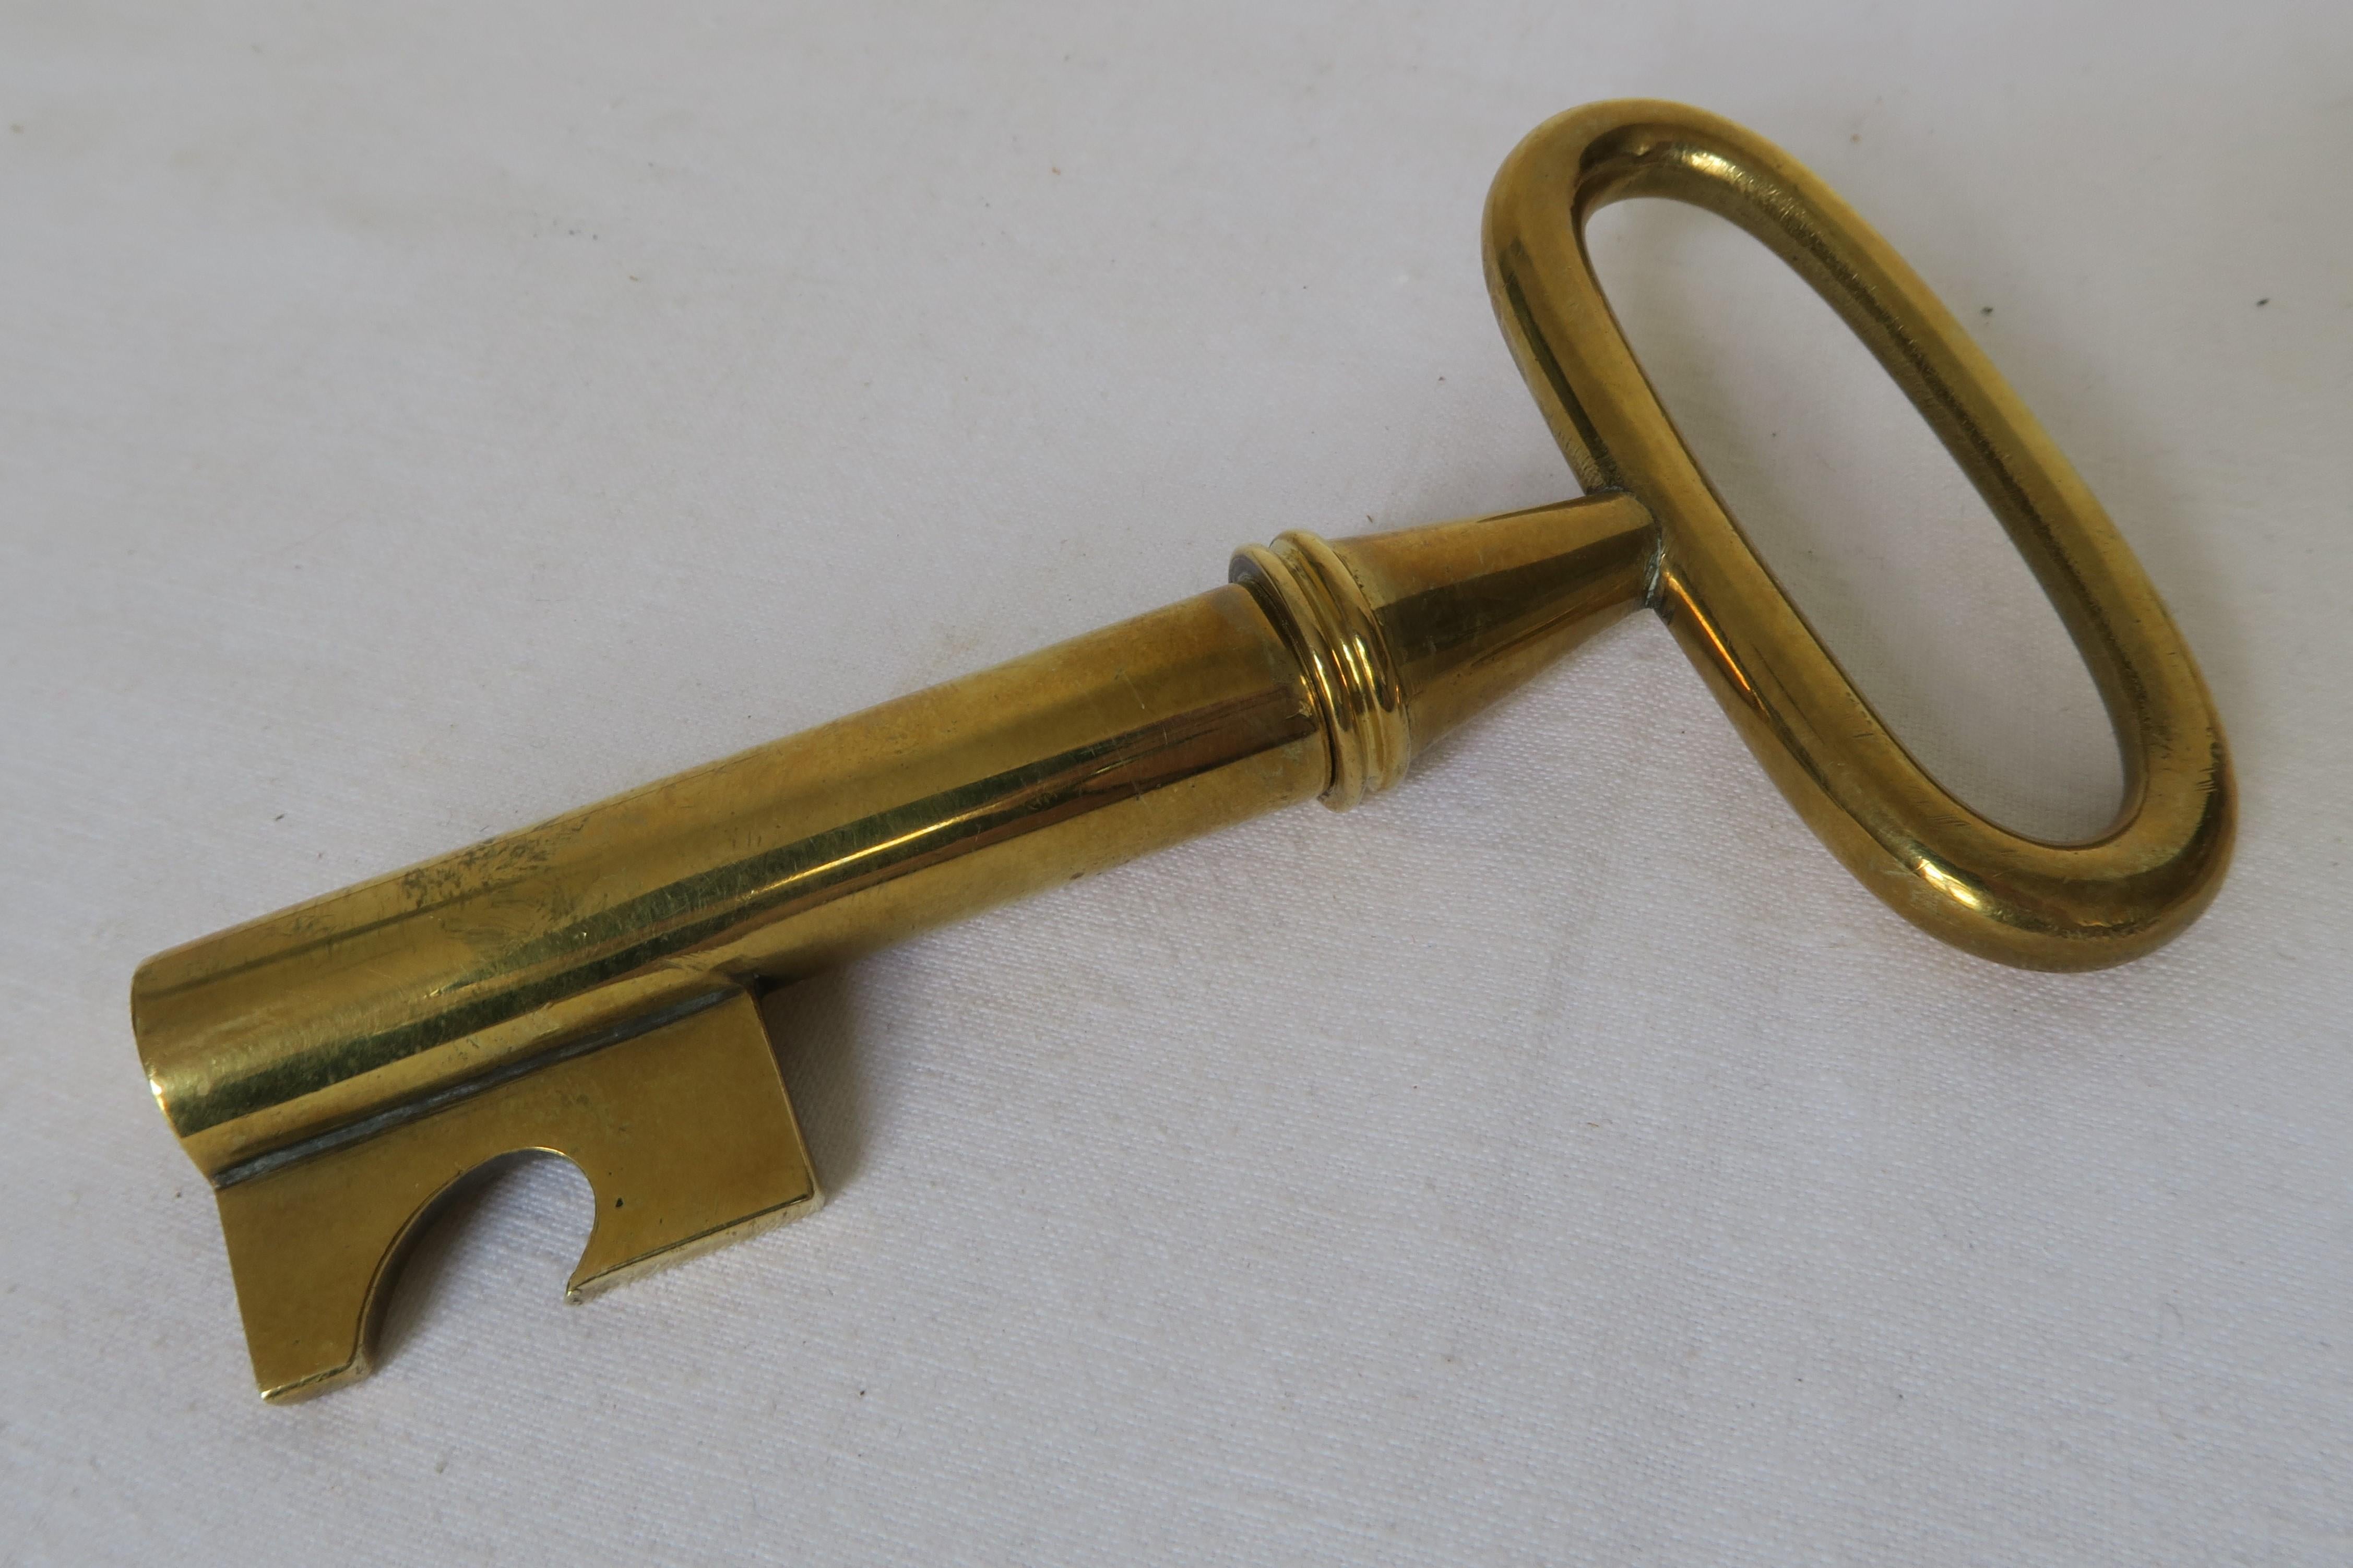 For sale is a beautiful bottle opener and cork screw in key shape. It was crafted from brass and designed by the renowned workshops of Carl Auböck in Austria. The item represents the typical reduced style of the 50s and German Bauhaus, where Auböck